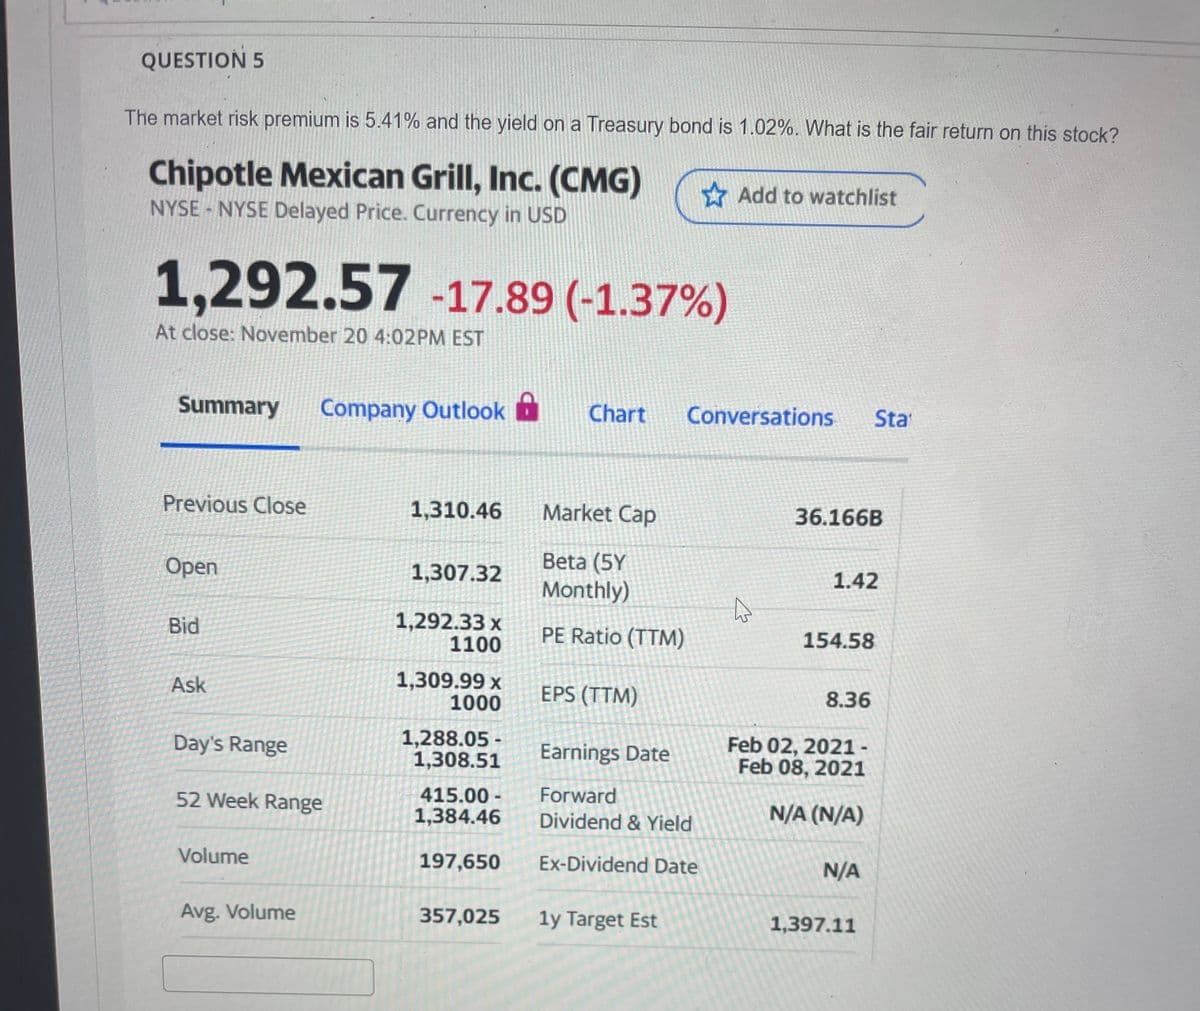 QUESTION 5
The market risk premium is 5.41% and the yield on a Treasury bond is 1.02%. What is the fair return on this stock?
Chipotle Mexican Grill, Inc. (CMG)
NYSE - NYSE Delayed Price. Currency in USD
1,292.57 -17.89 (-1.37%)
At close: November 20 4:02PM EST
Summary Company Outlook
Previous Close
Open
Bid
Ask
Day's Range
52 Week Range
Volume
Avg. Volume
1,310.46
1,307.32
1,292.33 x
1100
1,309.99 x
1000
1,288.05 -
1,308.51
415.00-
1,384.46
197,650
357,025
Chart
Market Cap
Beta (5Y
Monthly)
PE Ratio (TTM)
EPS (TTM)
Conversations Sta
Earnings Date
Forward
Dividend & Yield
Ex-Dividend Date
1y Target Est
Add to watchlist
4
36.166B
1.42
154.58
8.36
Feb 02, 2021-
Feb 08, 2021
N/A (N/A)
N/A
1,397.11